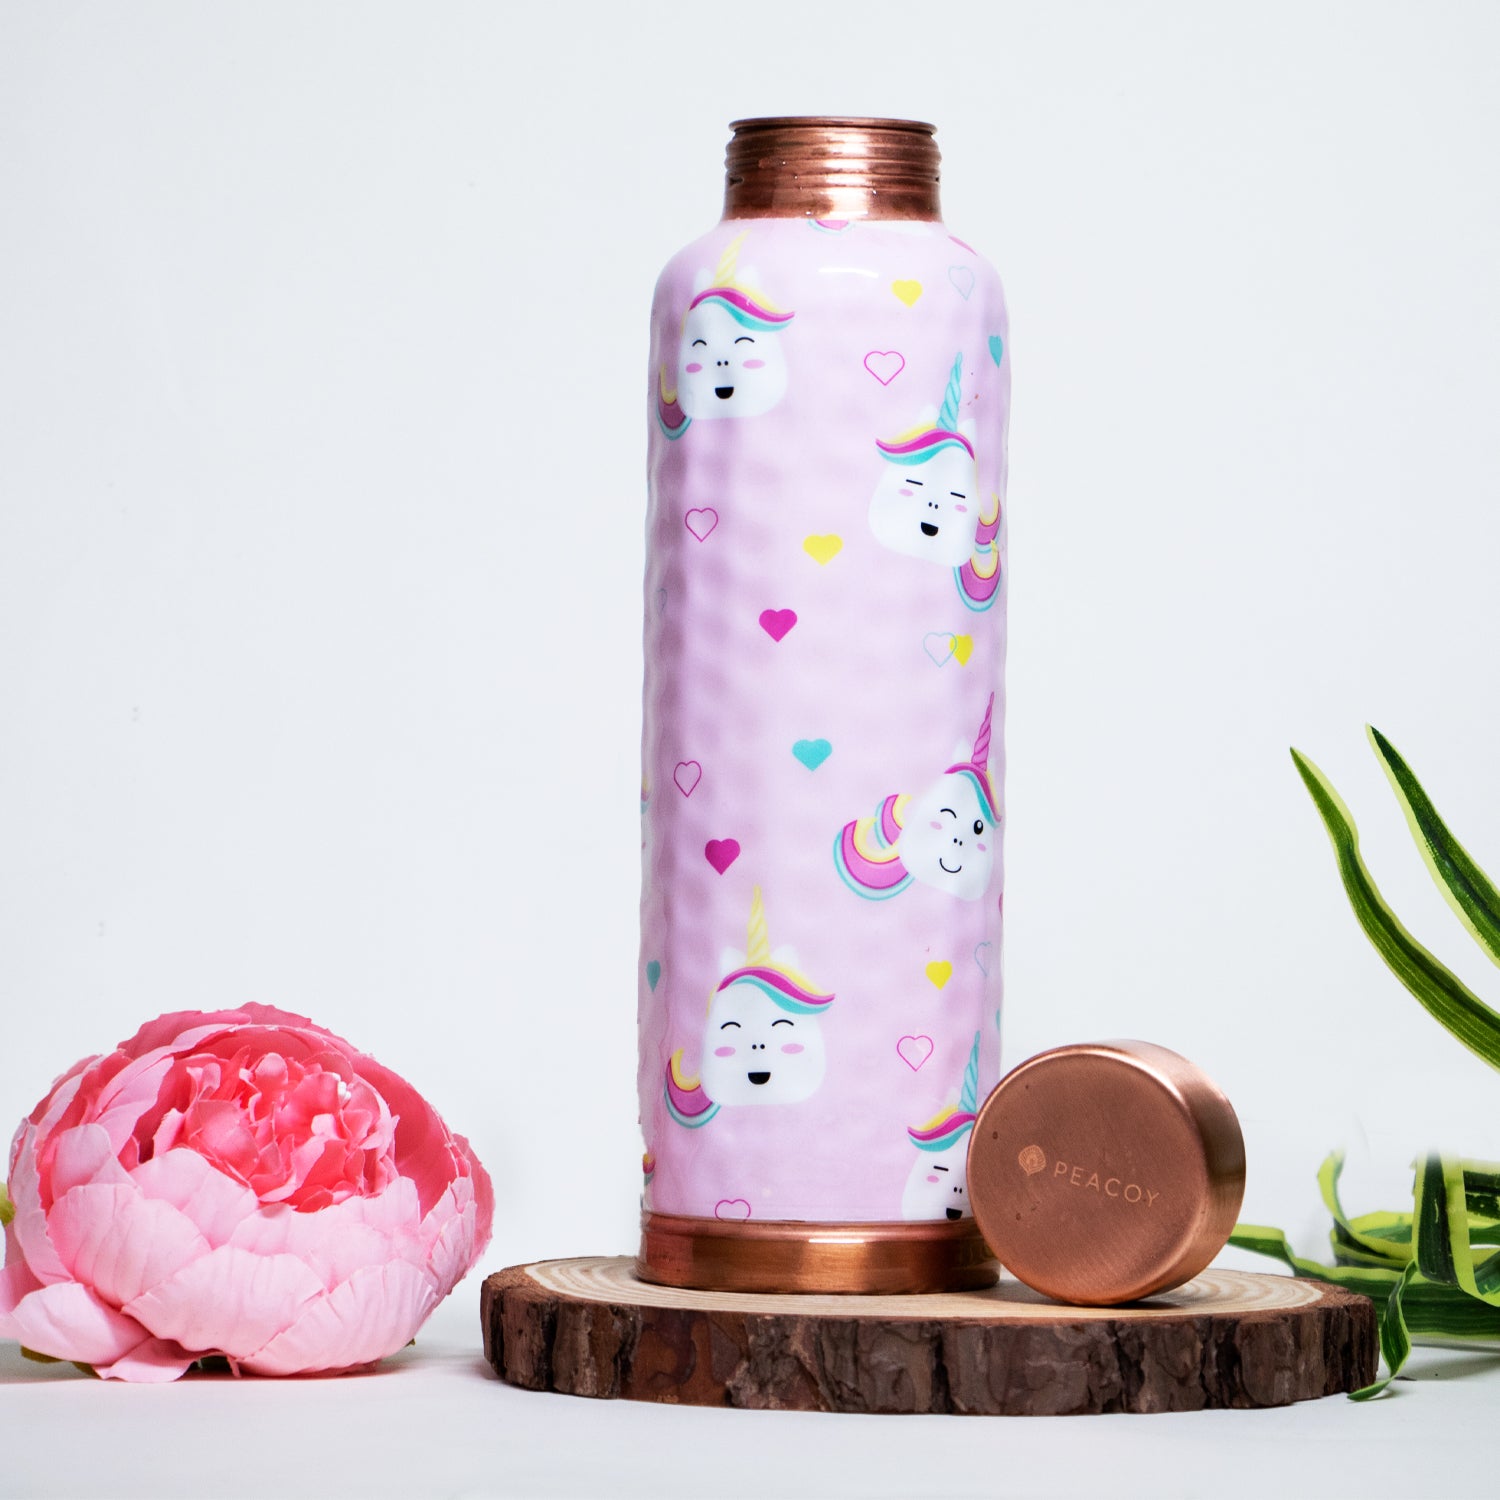 Baby Unicorn Hammered Printed | 100% Pure Copper Bottle|950 ml | Peacoy